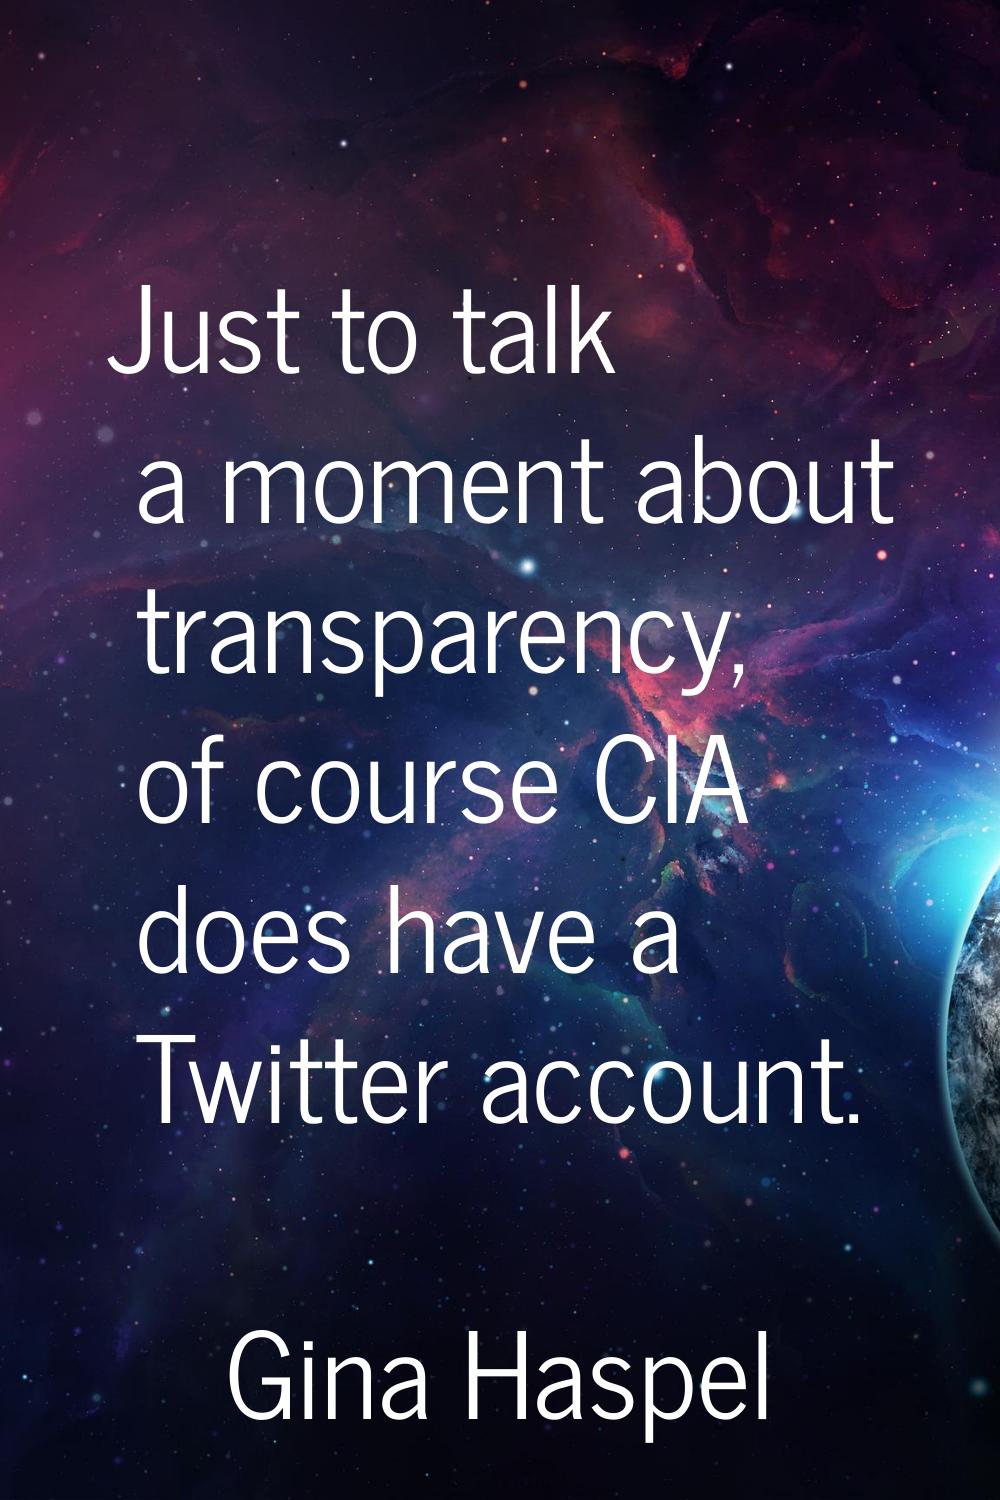 Just to talk a moment about transparency, of course CIA does have a Twitter account.